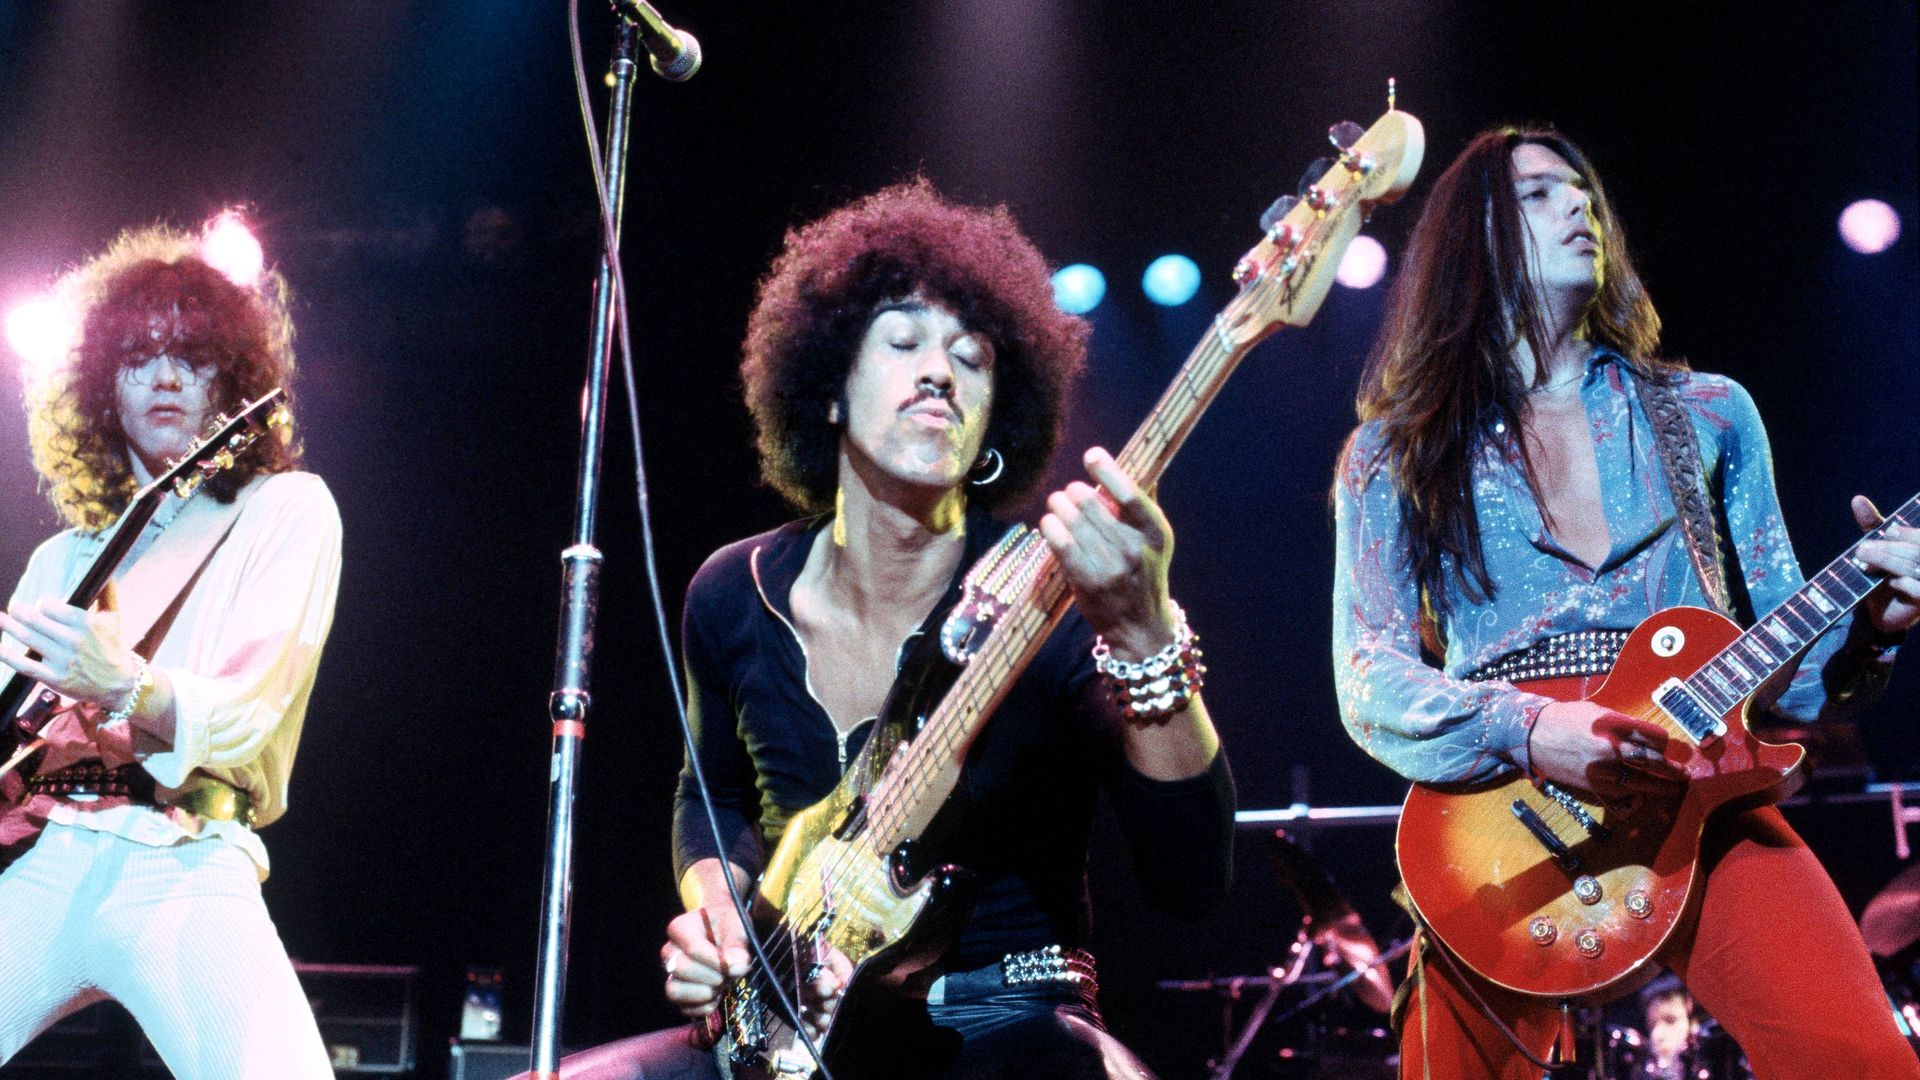 The three members of 1970s rock band Thin Lizzy perform on stage.